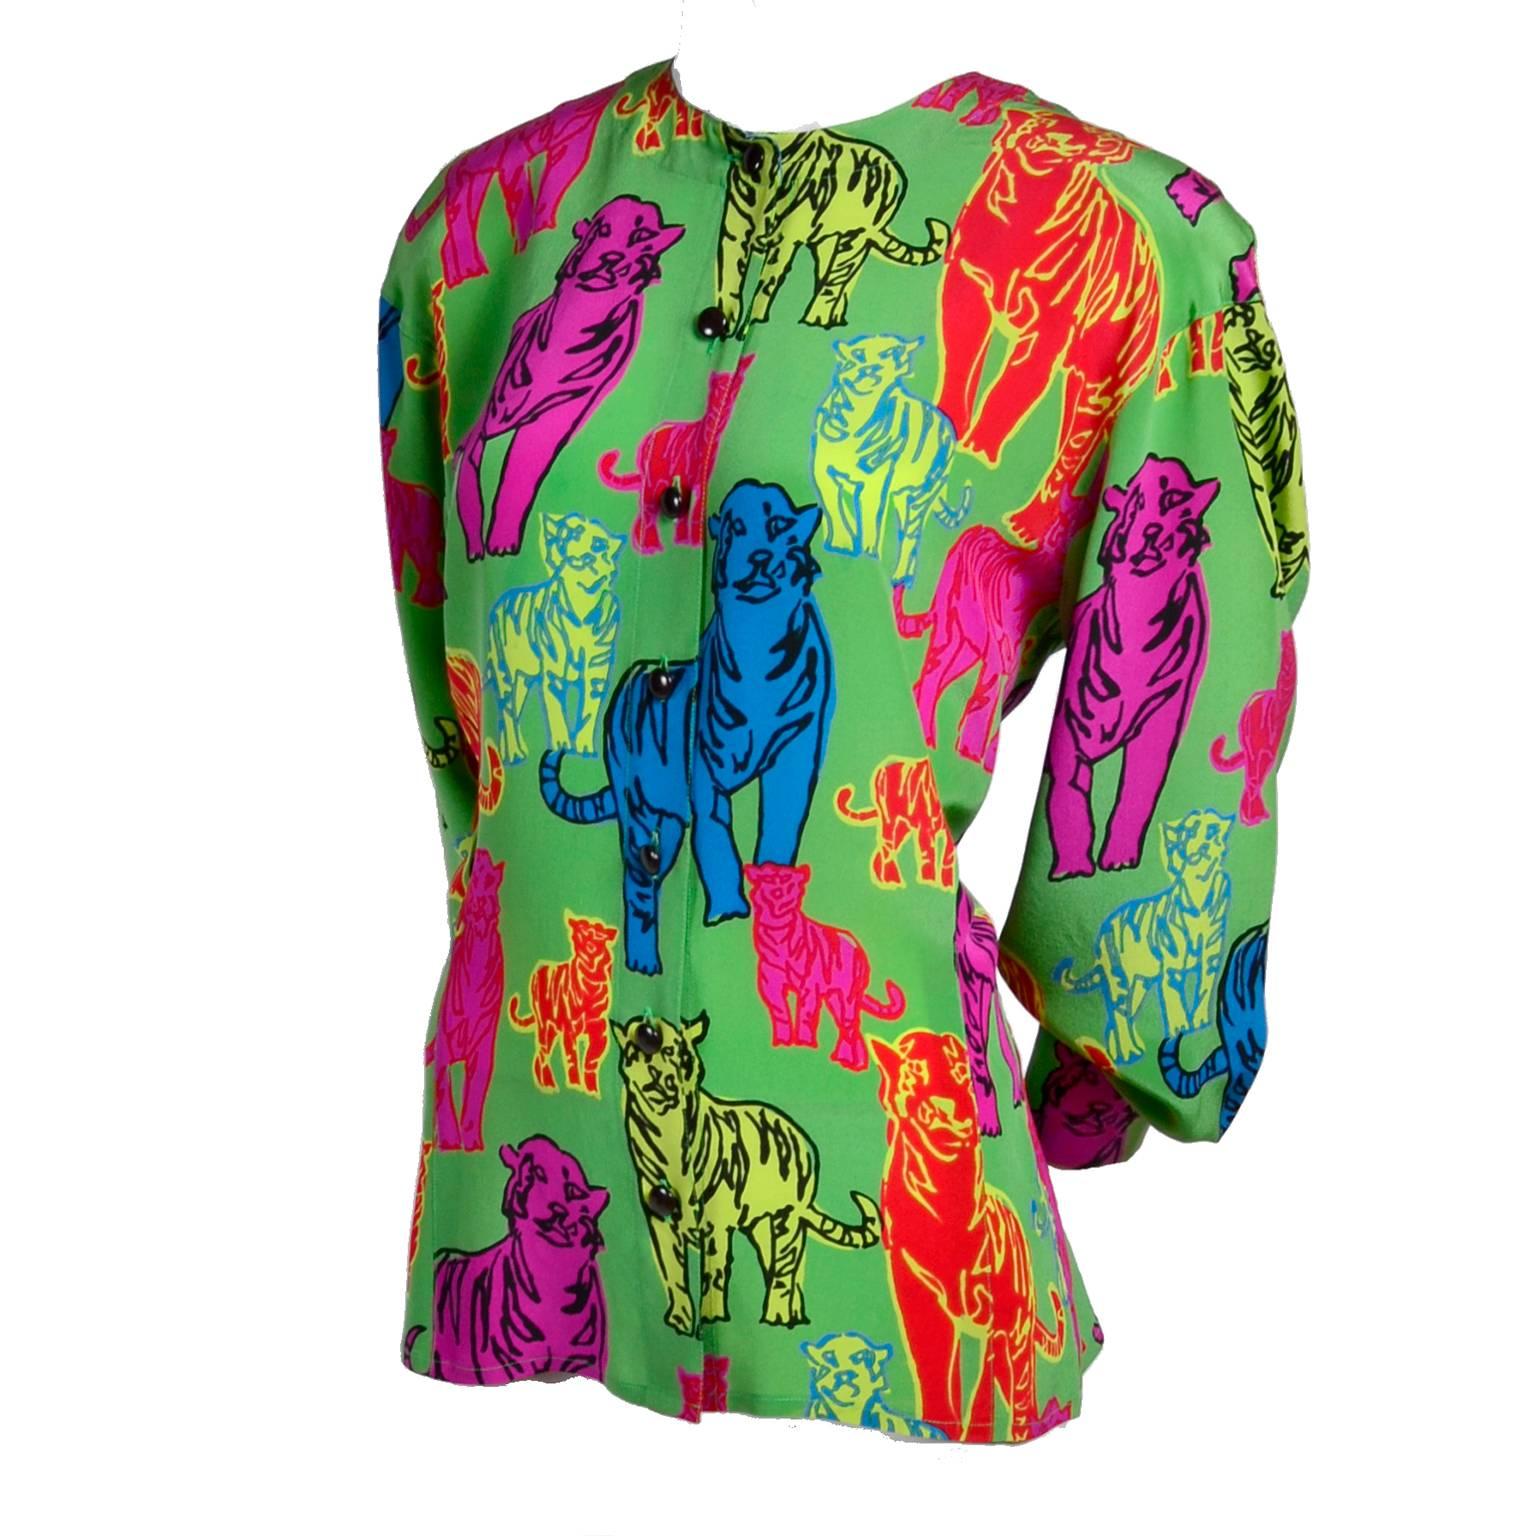 This is a stunning late 1980's or early 1990s Margaretha Ley for Escada green silk blouse in a bright colorful Andy Warhol-esque tiger print in yellow, pink, red, blue and green. This unique pop art blouse is collarless and buttons down the front.